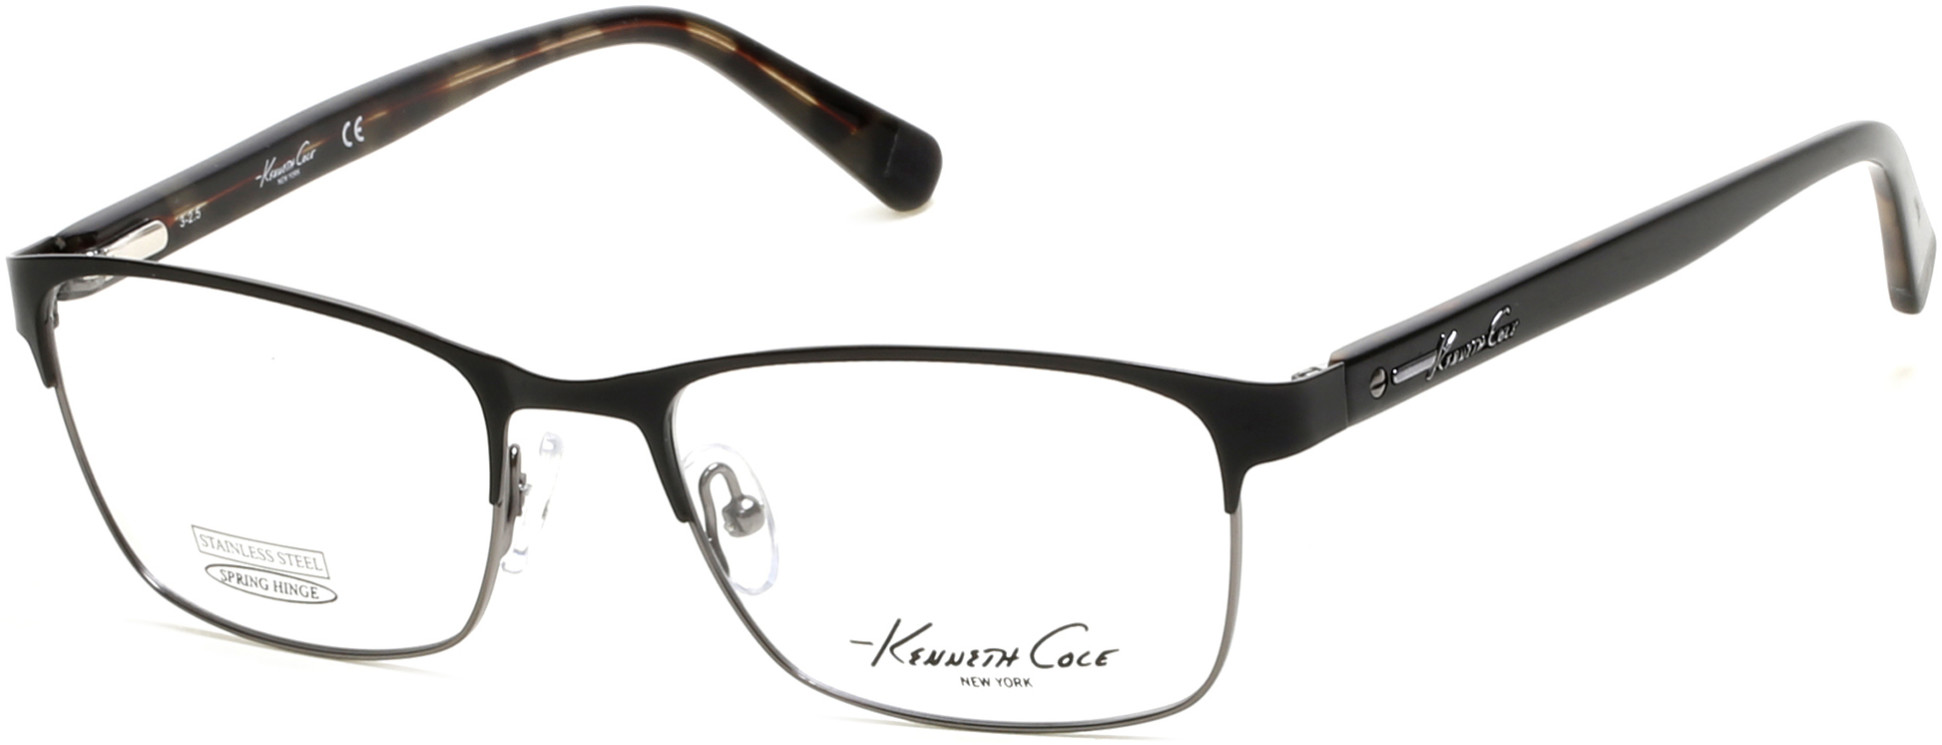 KENNETH COLE NY 0248